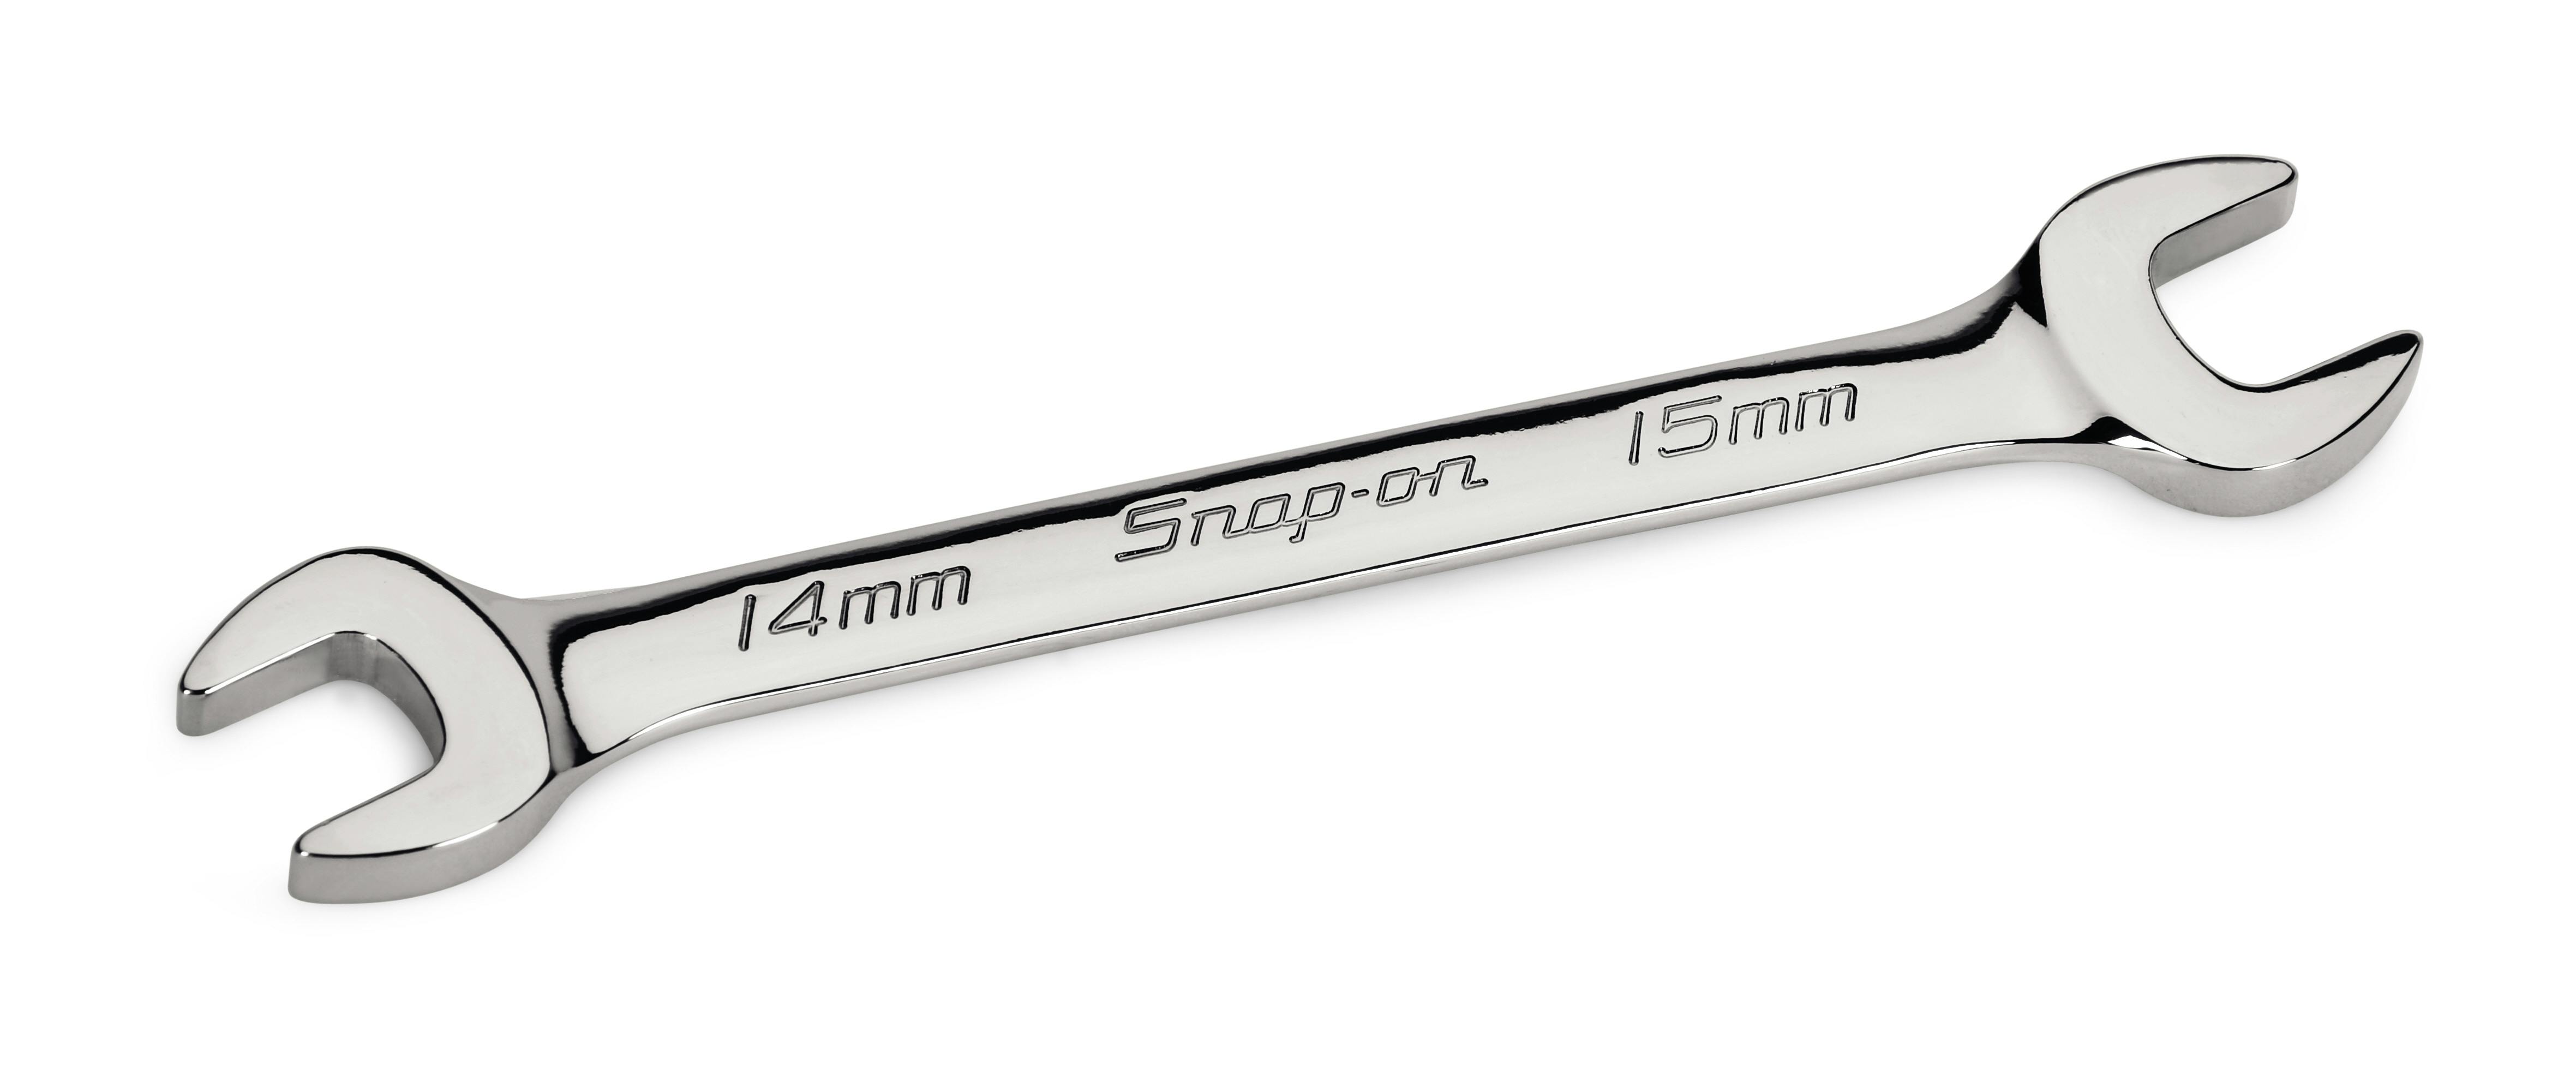 Standard, mm | Snap-on Store